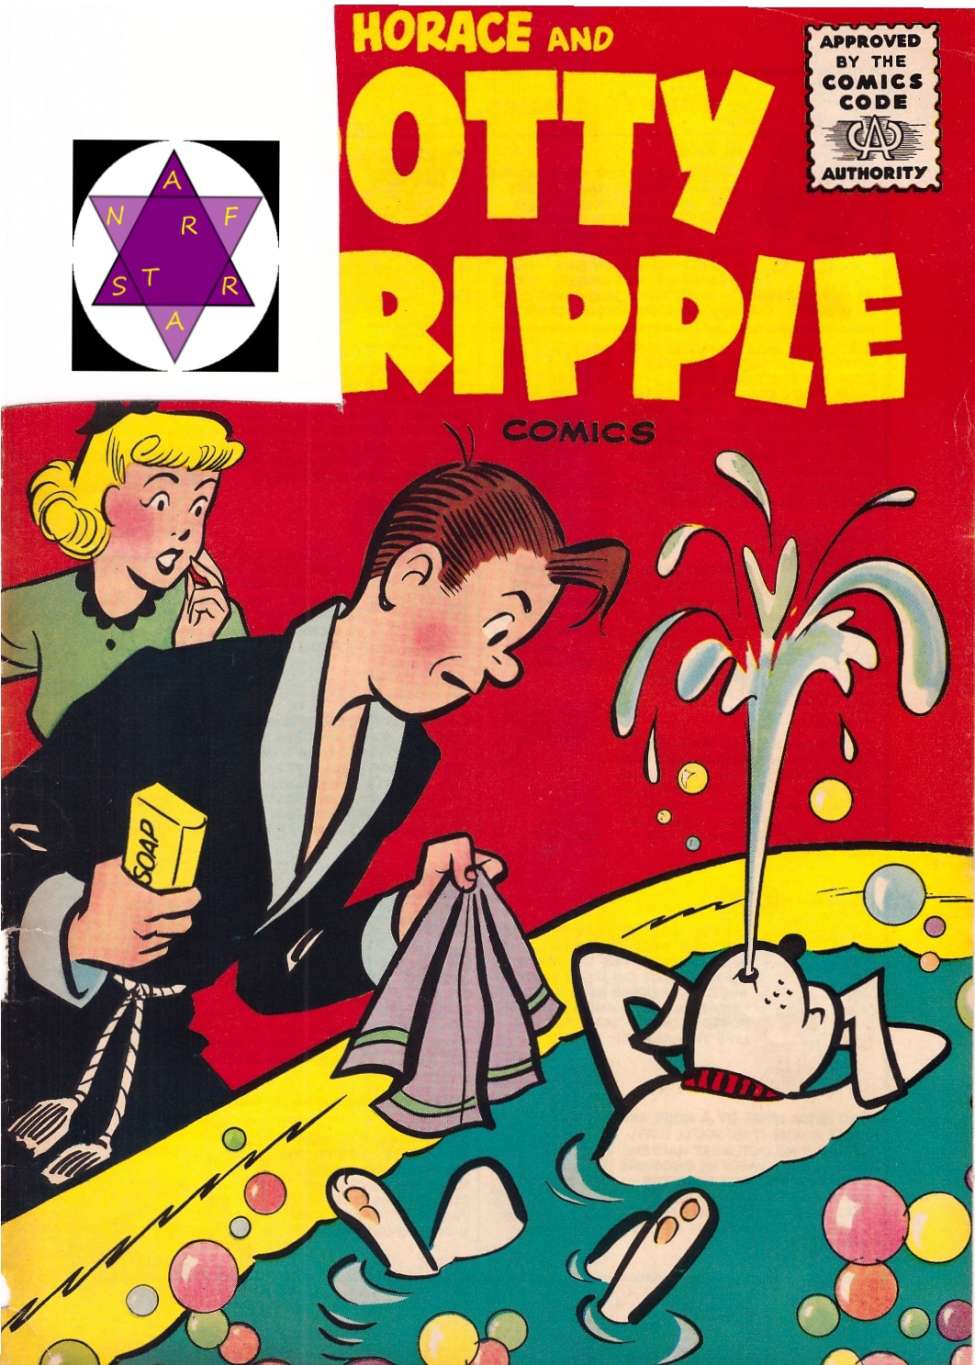 Book Cover For Horace & Dotty Dripple 42